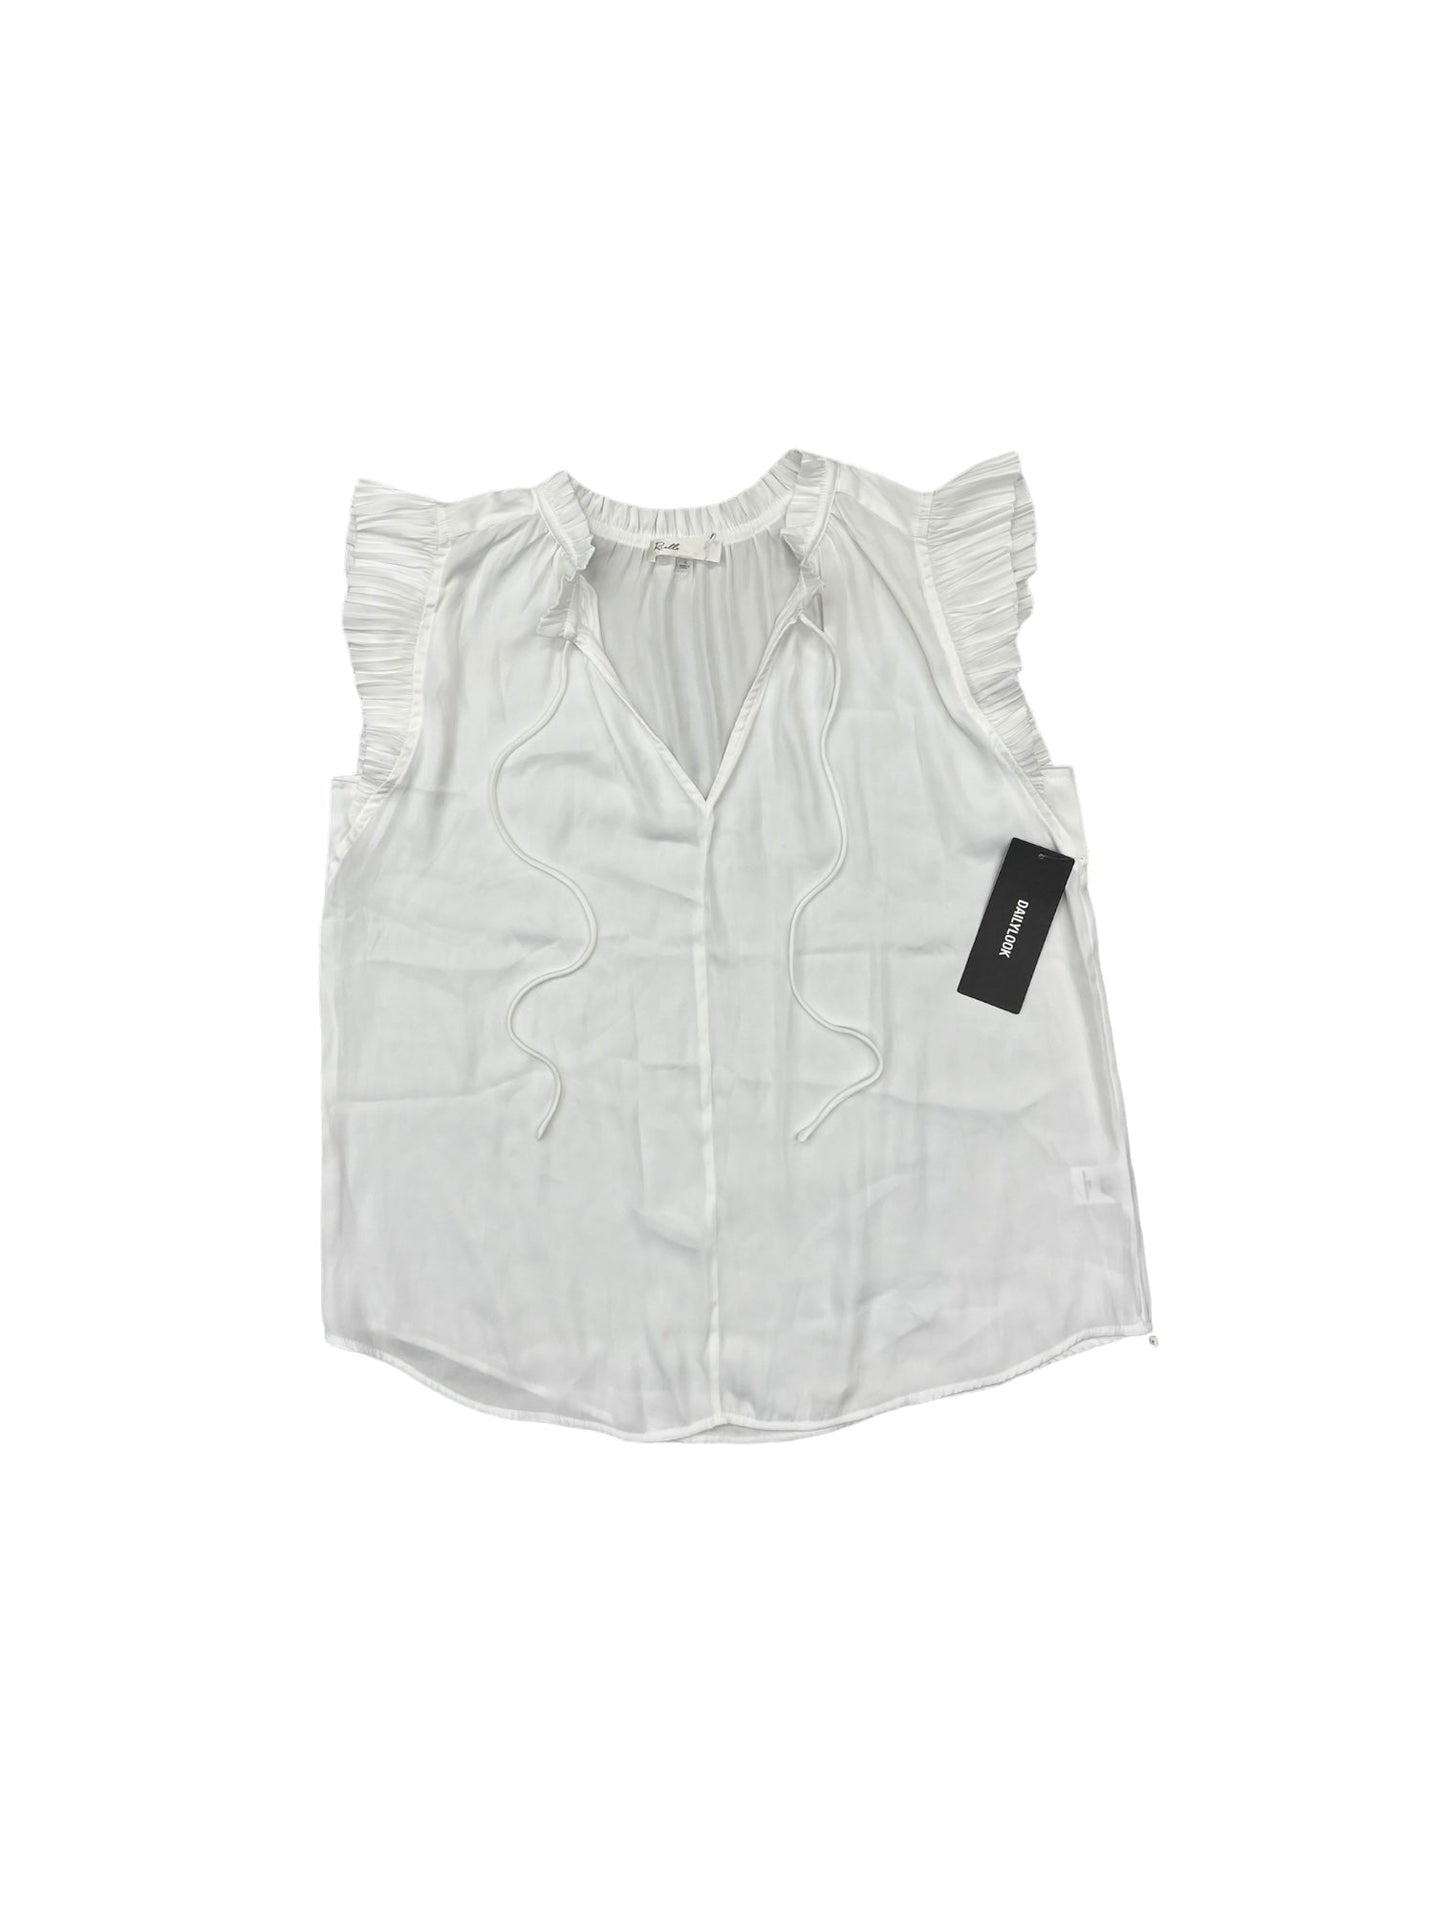 White Top Sleeveless DAILY LOOK, Size M